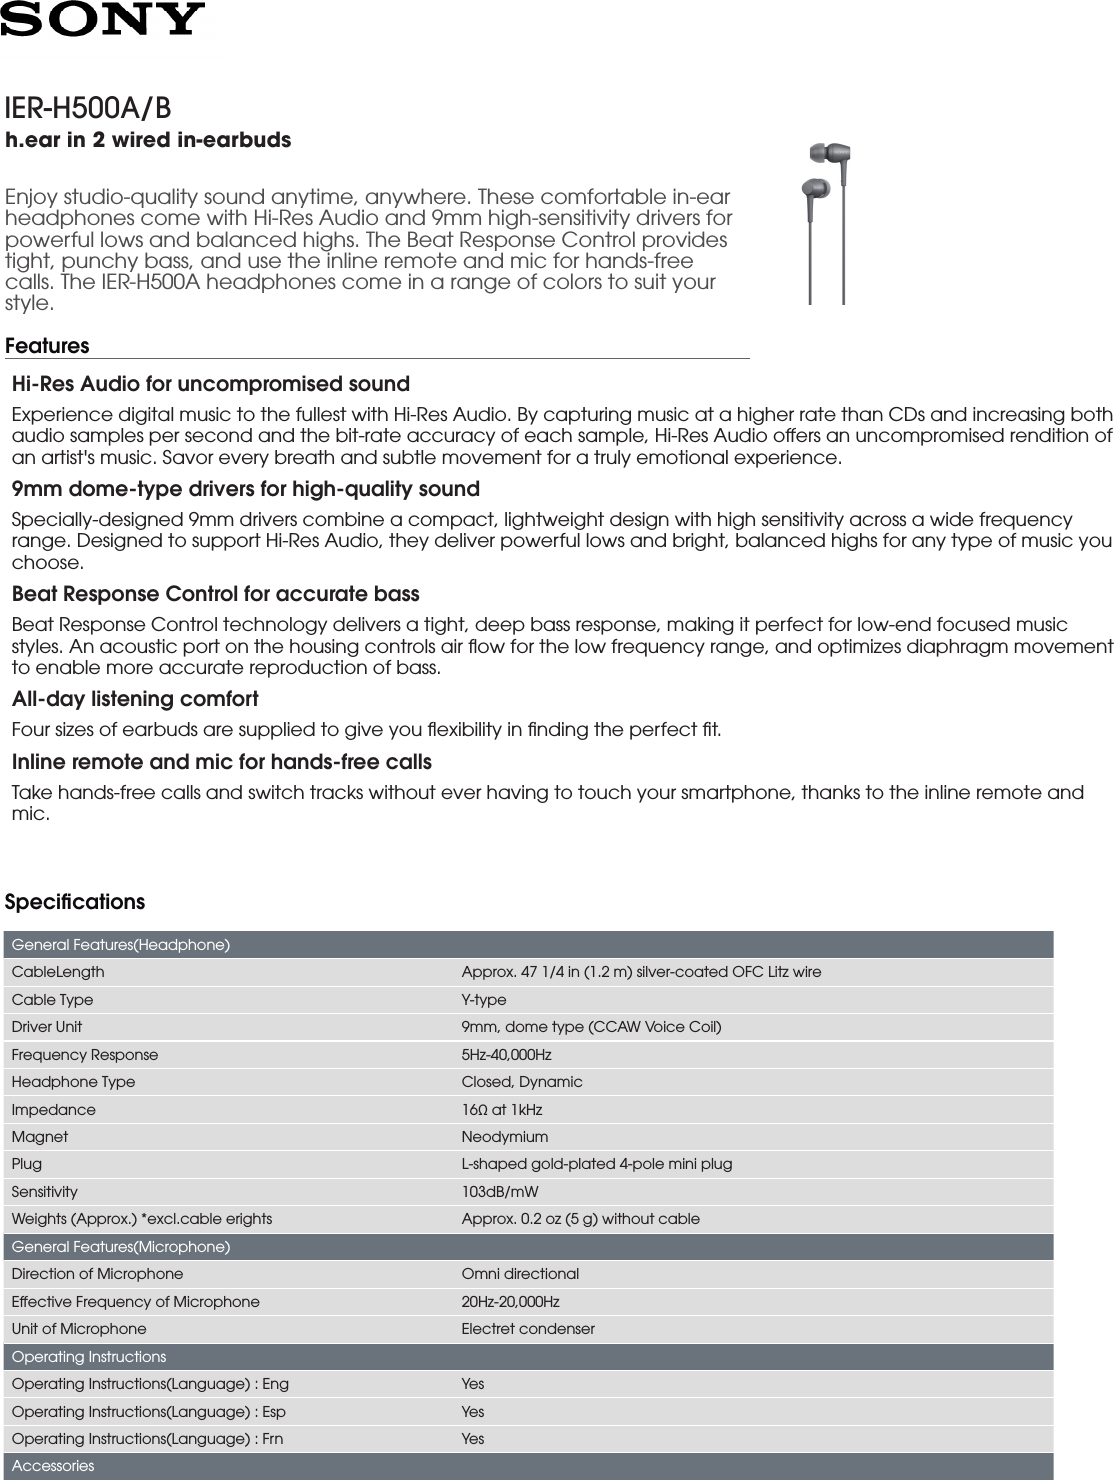 Page 1 of 2 - Sony IER-H500A User Manual Marketing Specifications (Black ) IERH500AB Mksp